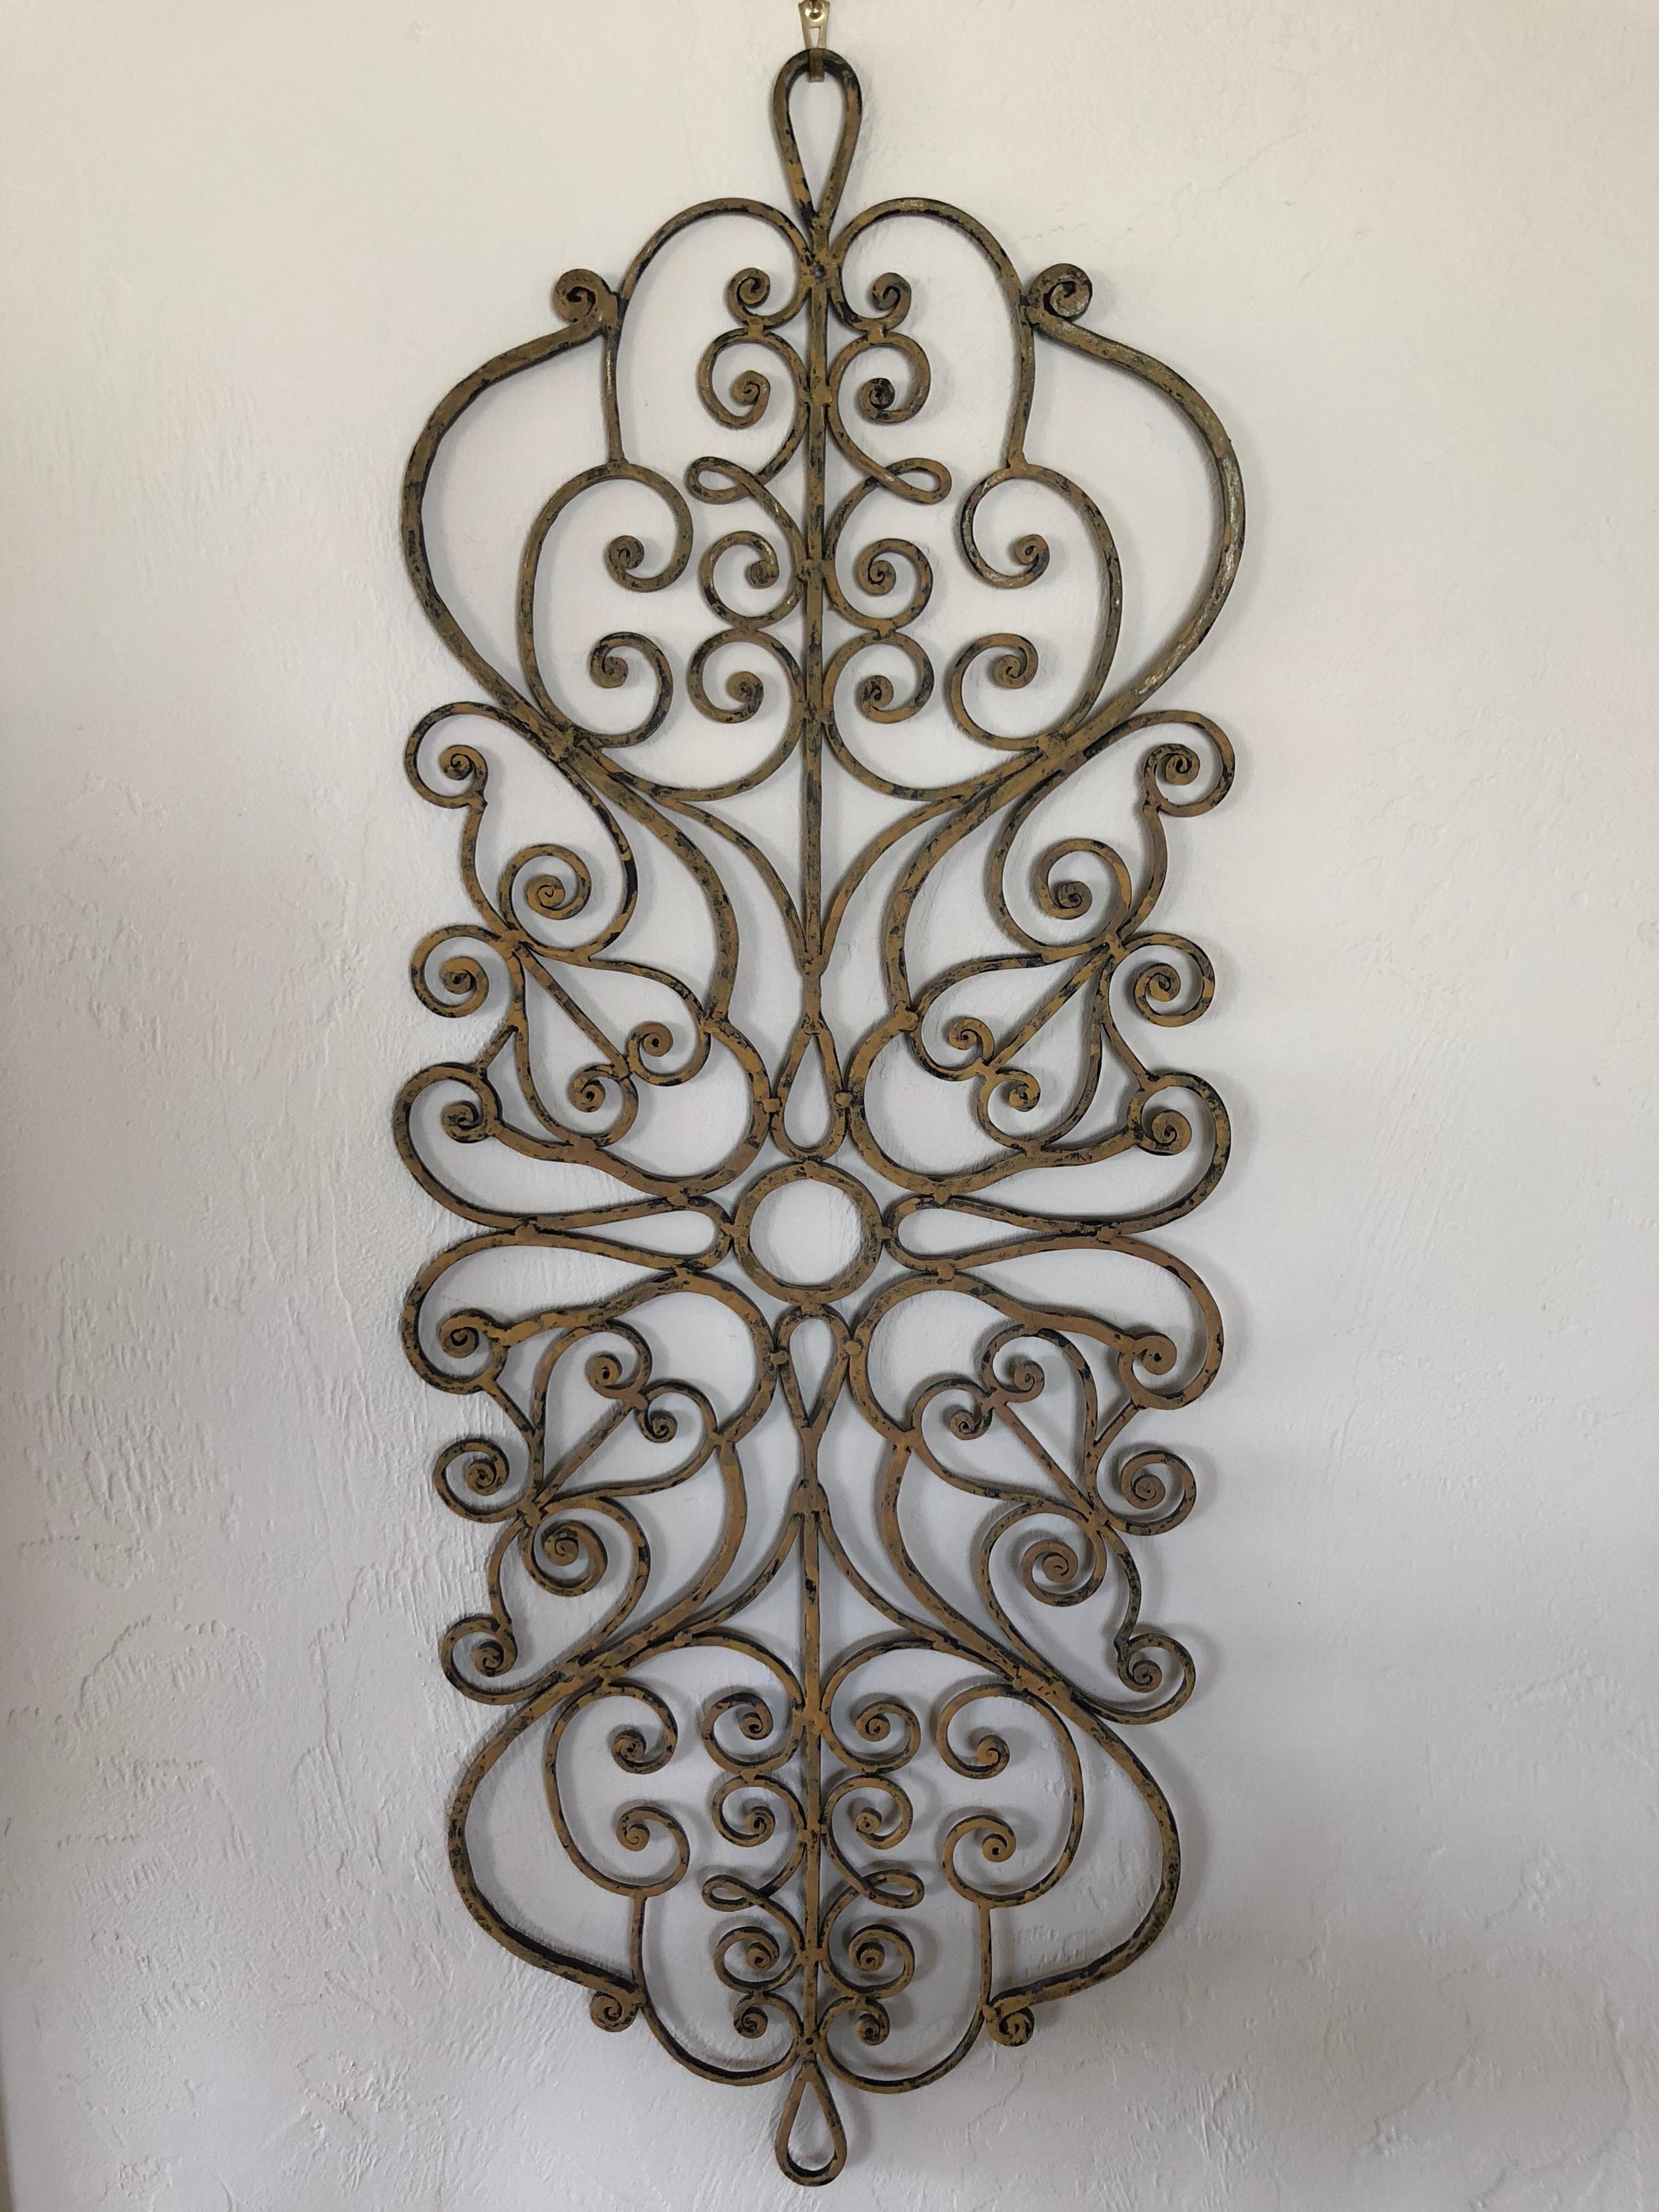 Large Hand-Wrought Iron Wall Sculpture 7